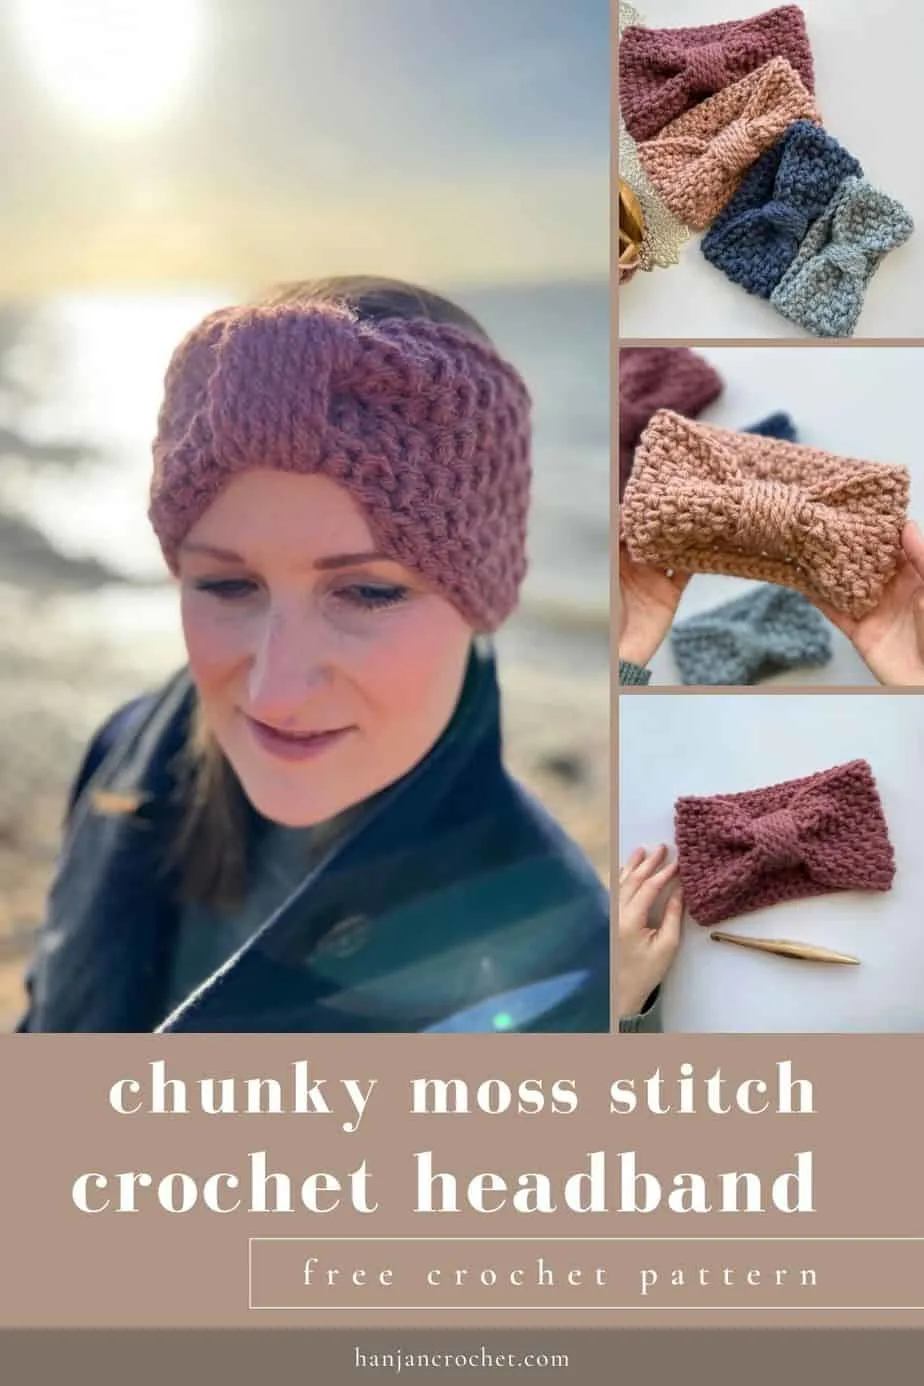 four images of chunky free crochet headband pattern in the herringbone moss stitch pattern